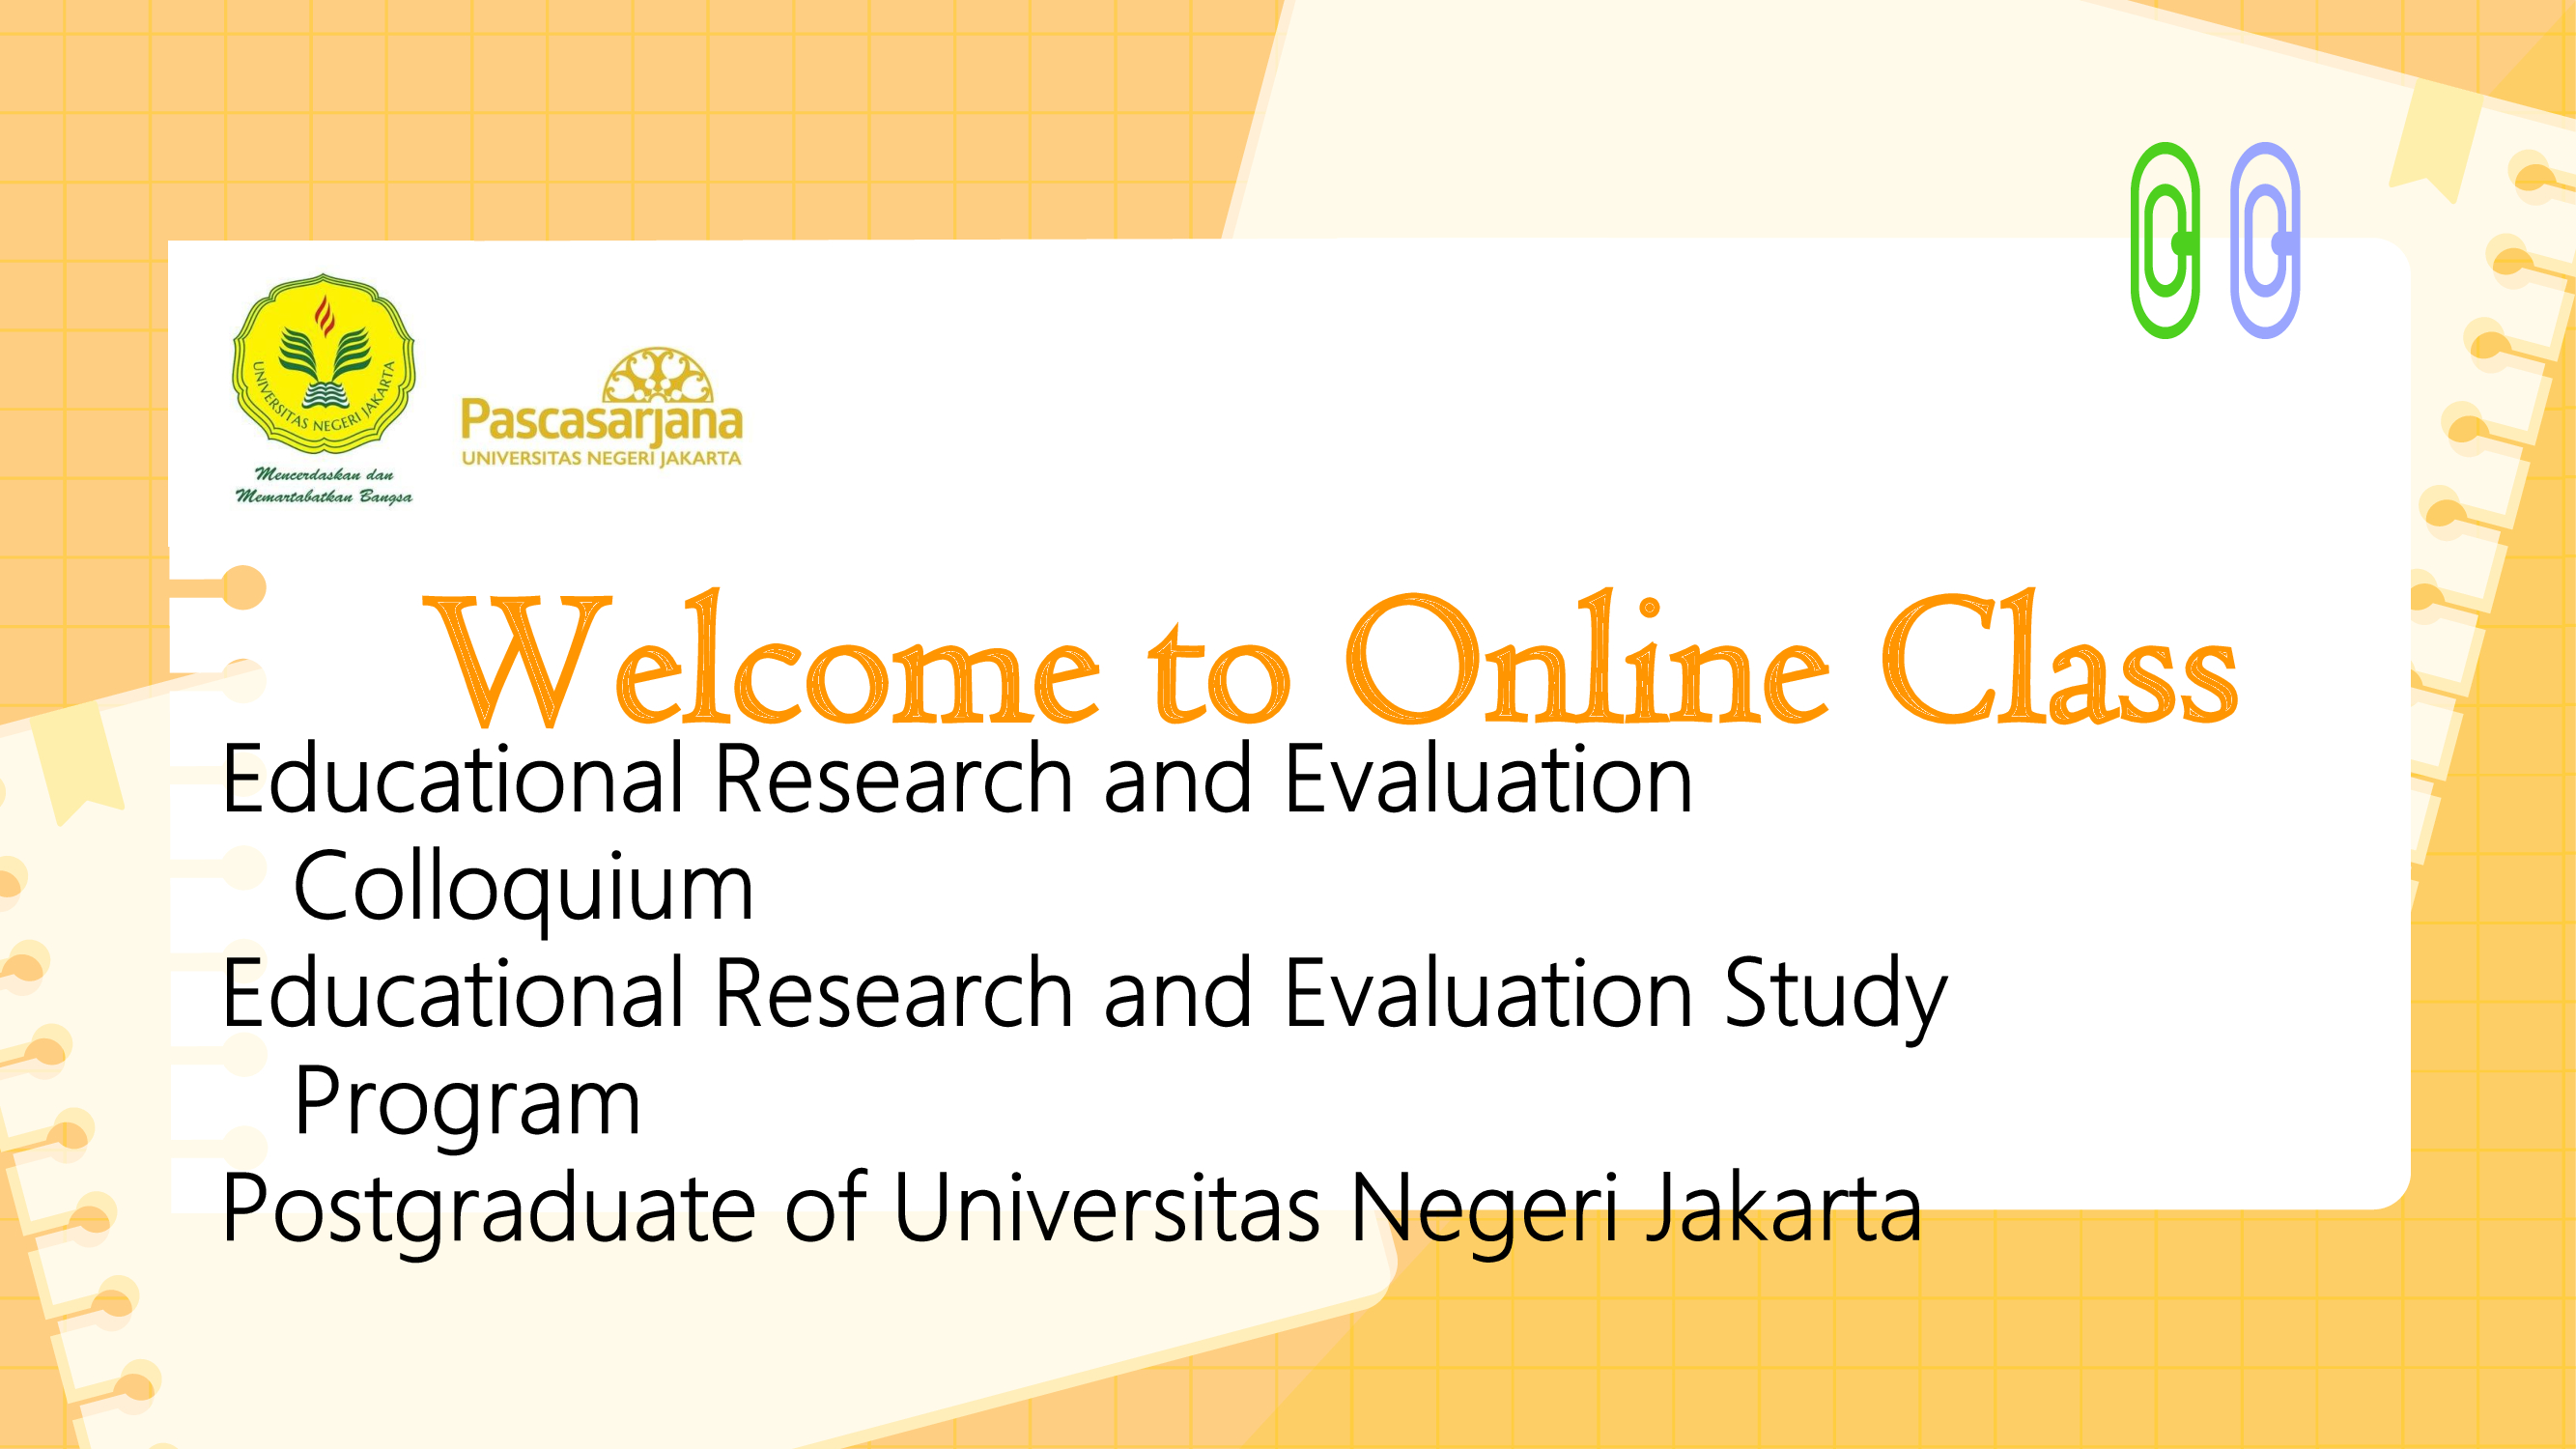 Educational Research and Evaluation Colloquium